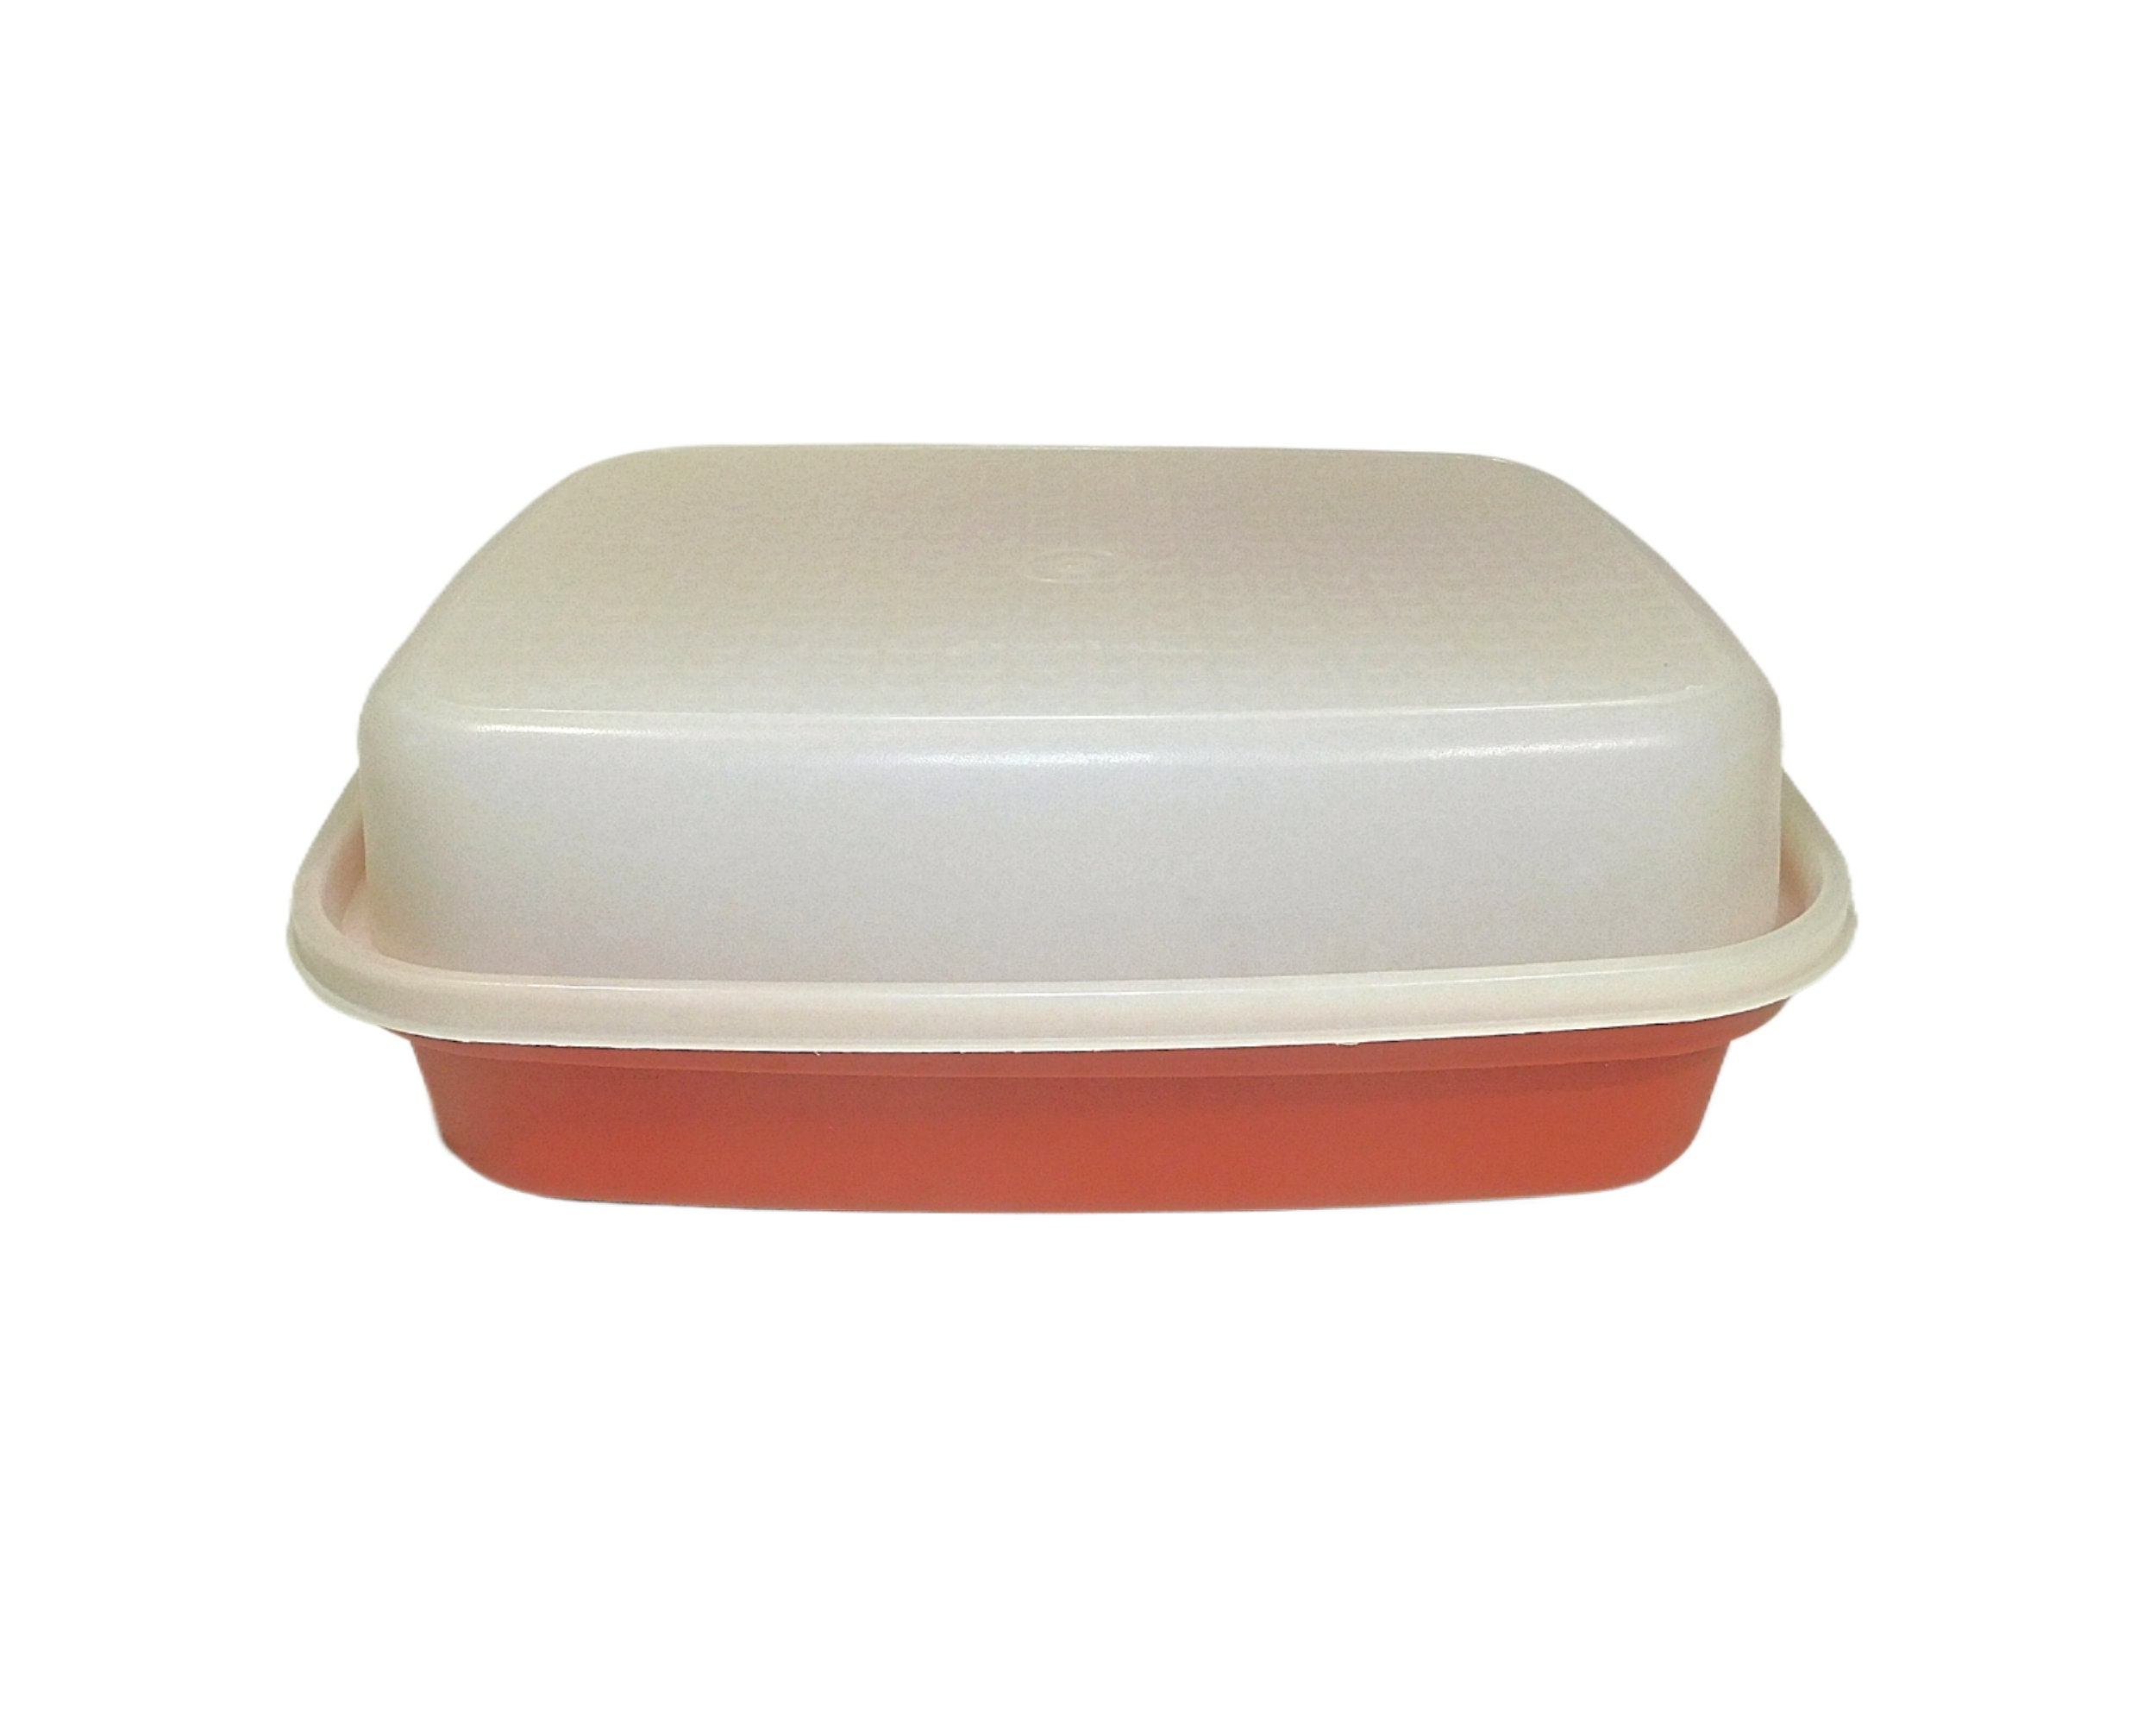 Vintage Tupperware Red Meat Marinating Container 1294-7 OR 